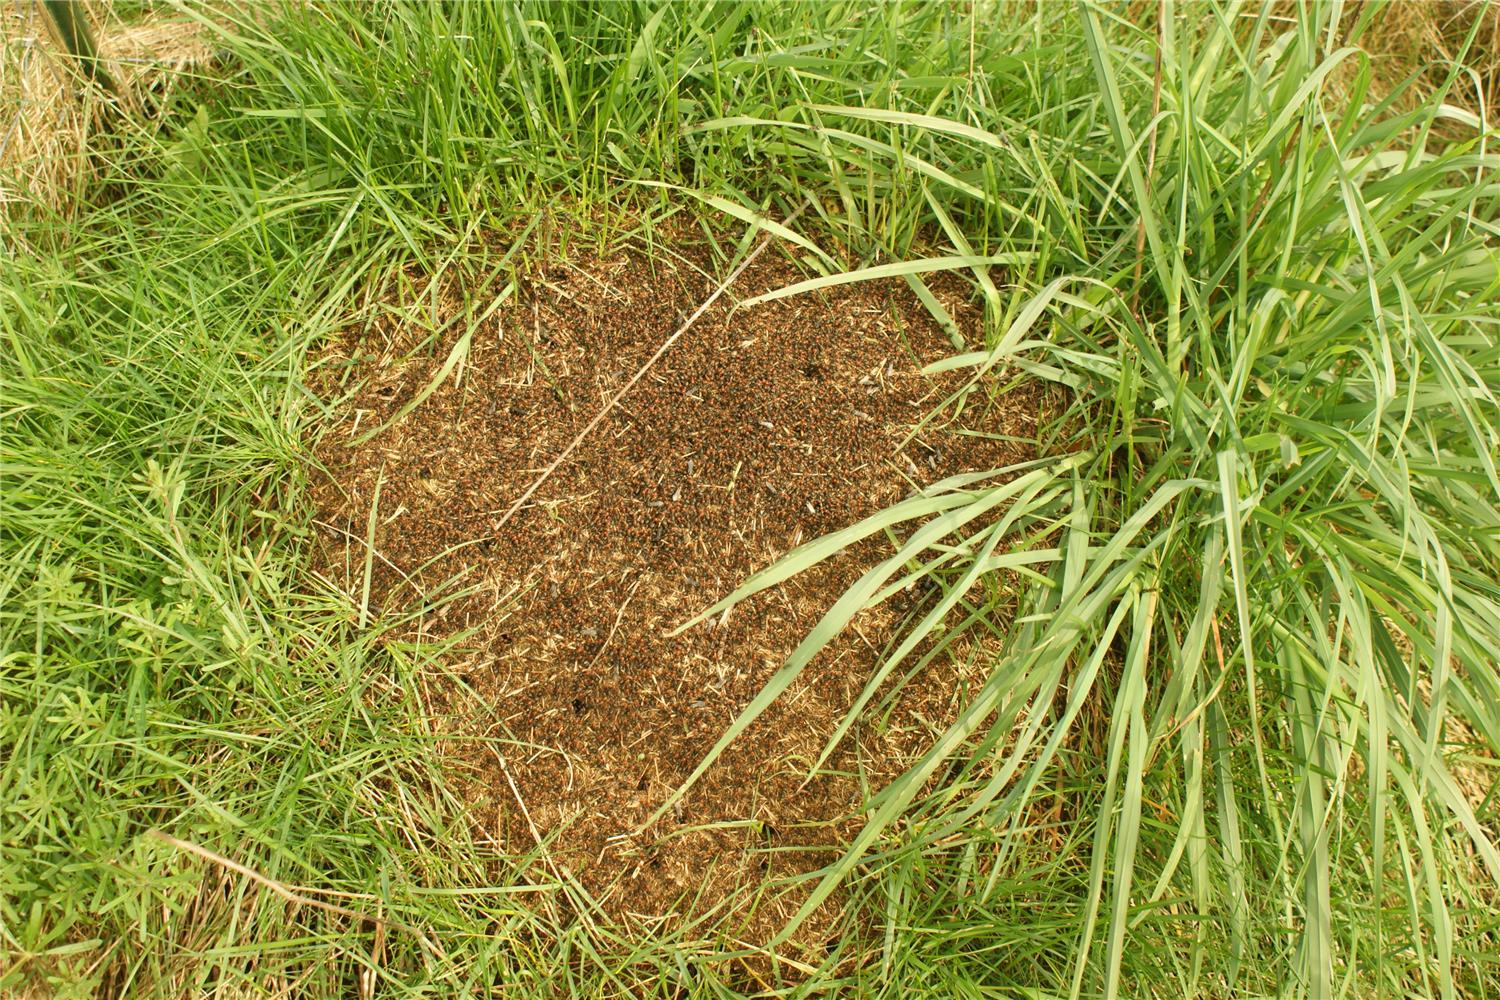 Thatching Ants